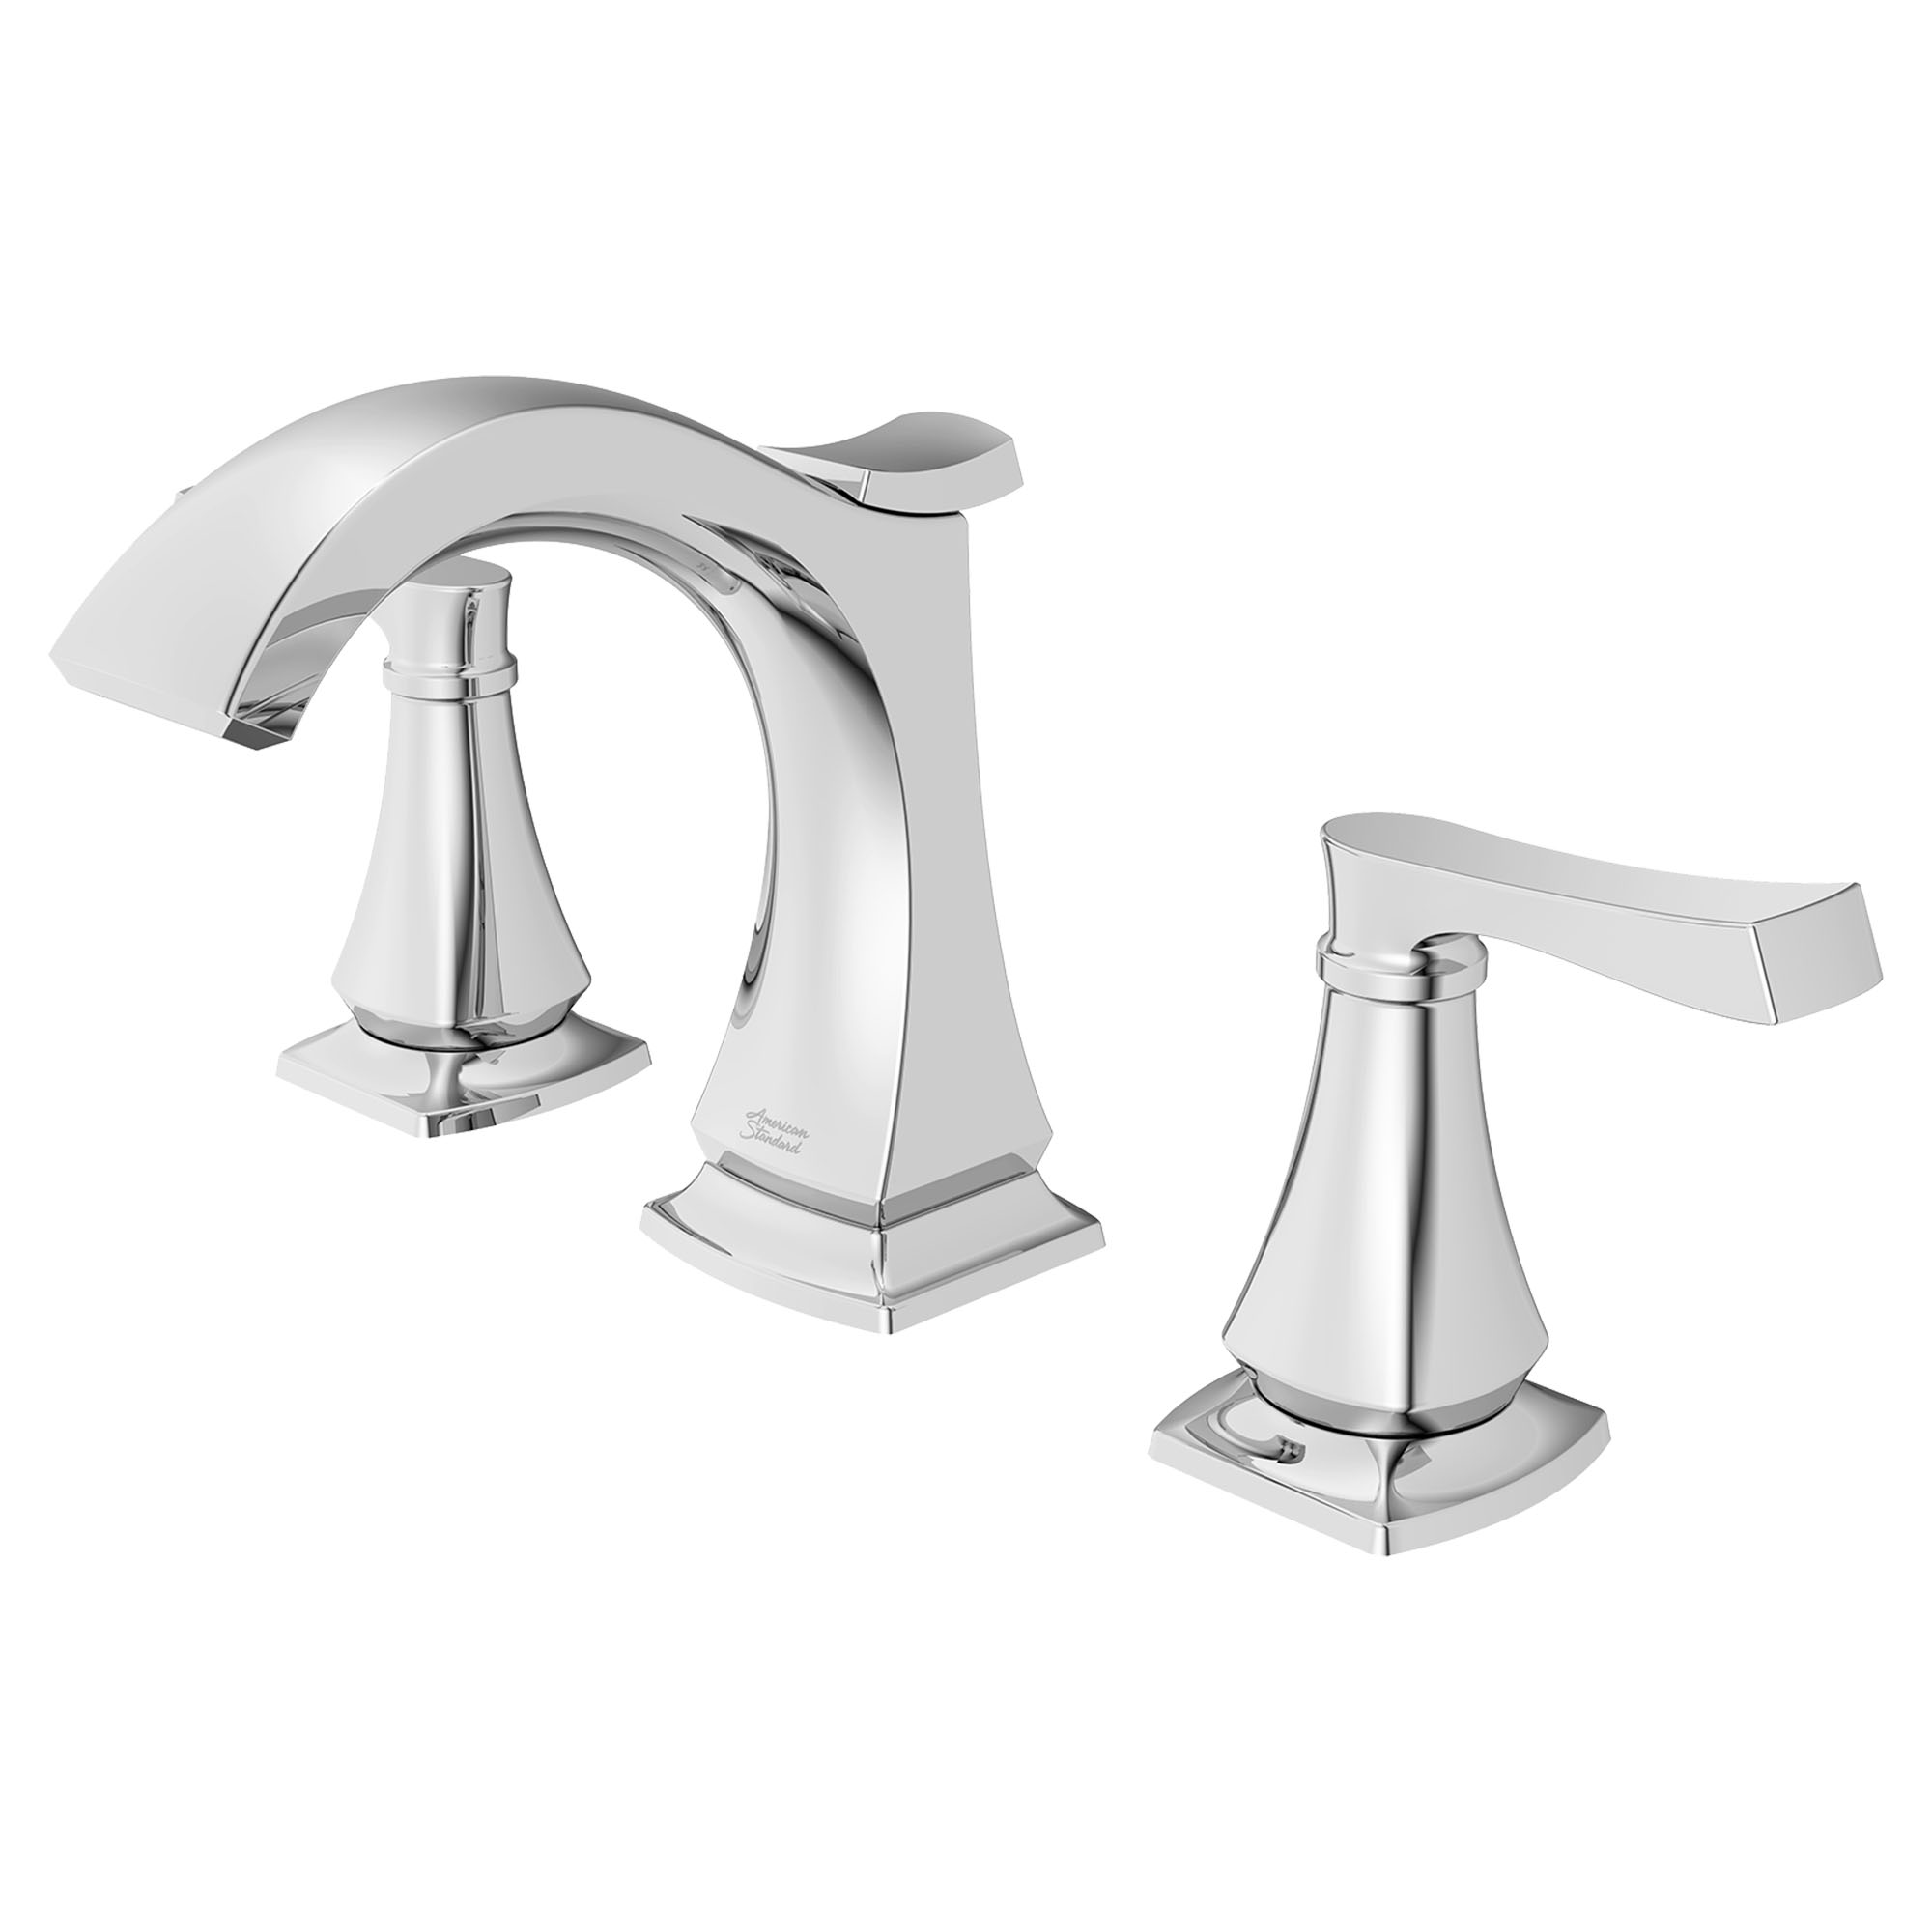 Kaleta® 8-Inch Widespread 2-Handle Bathroom Faucet 1.5 gpm/5.7 L/min With Lever Handles